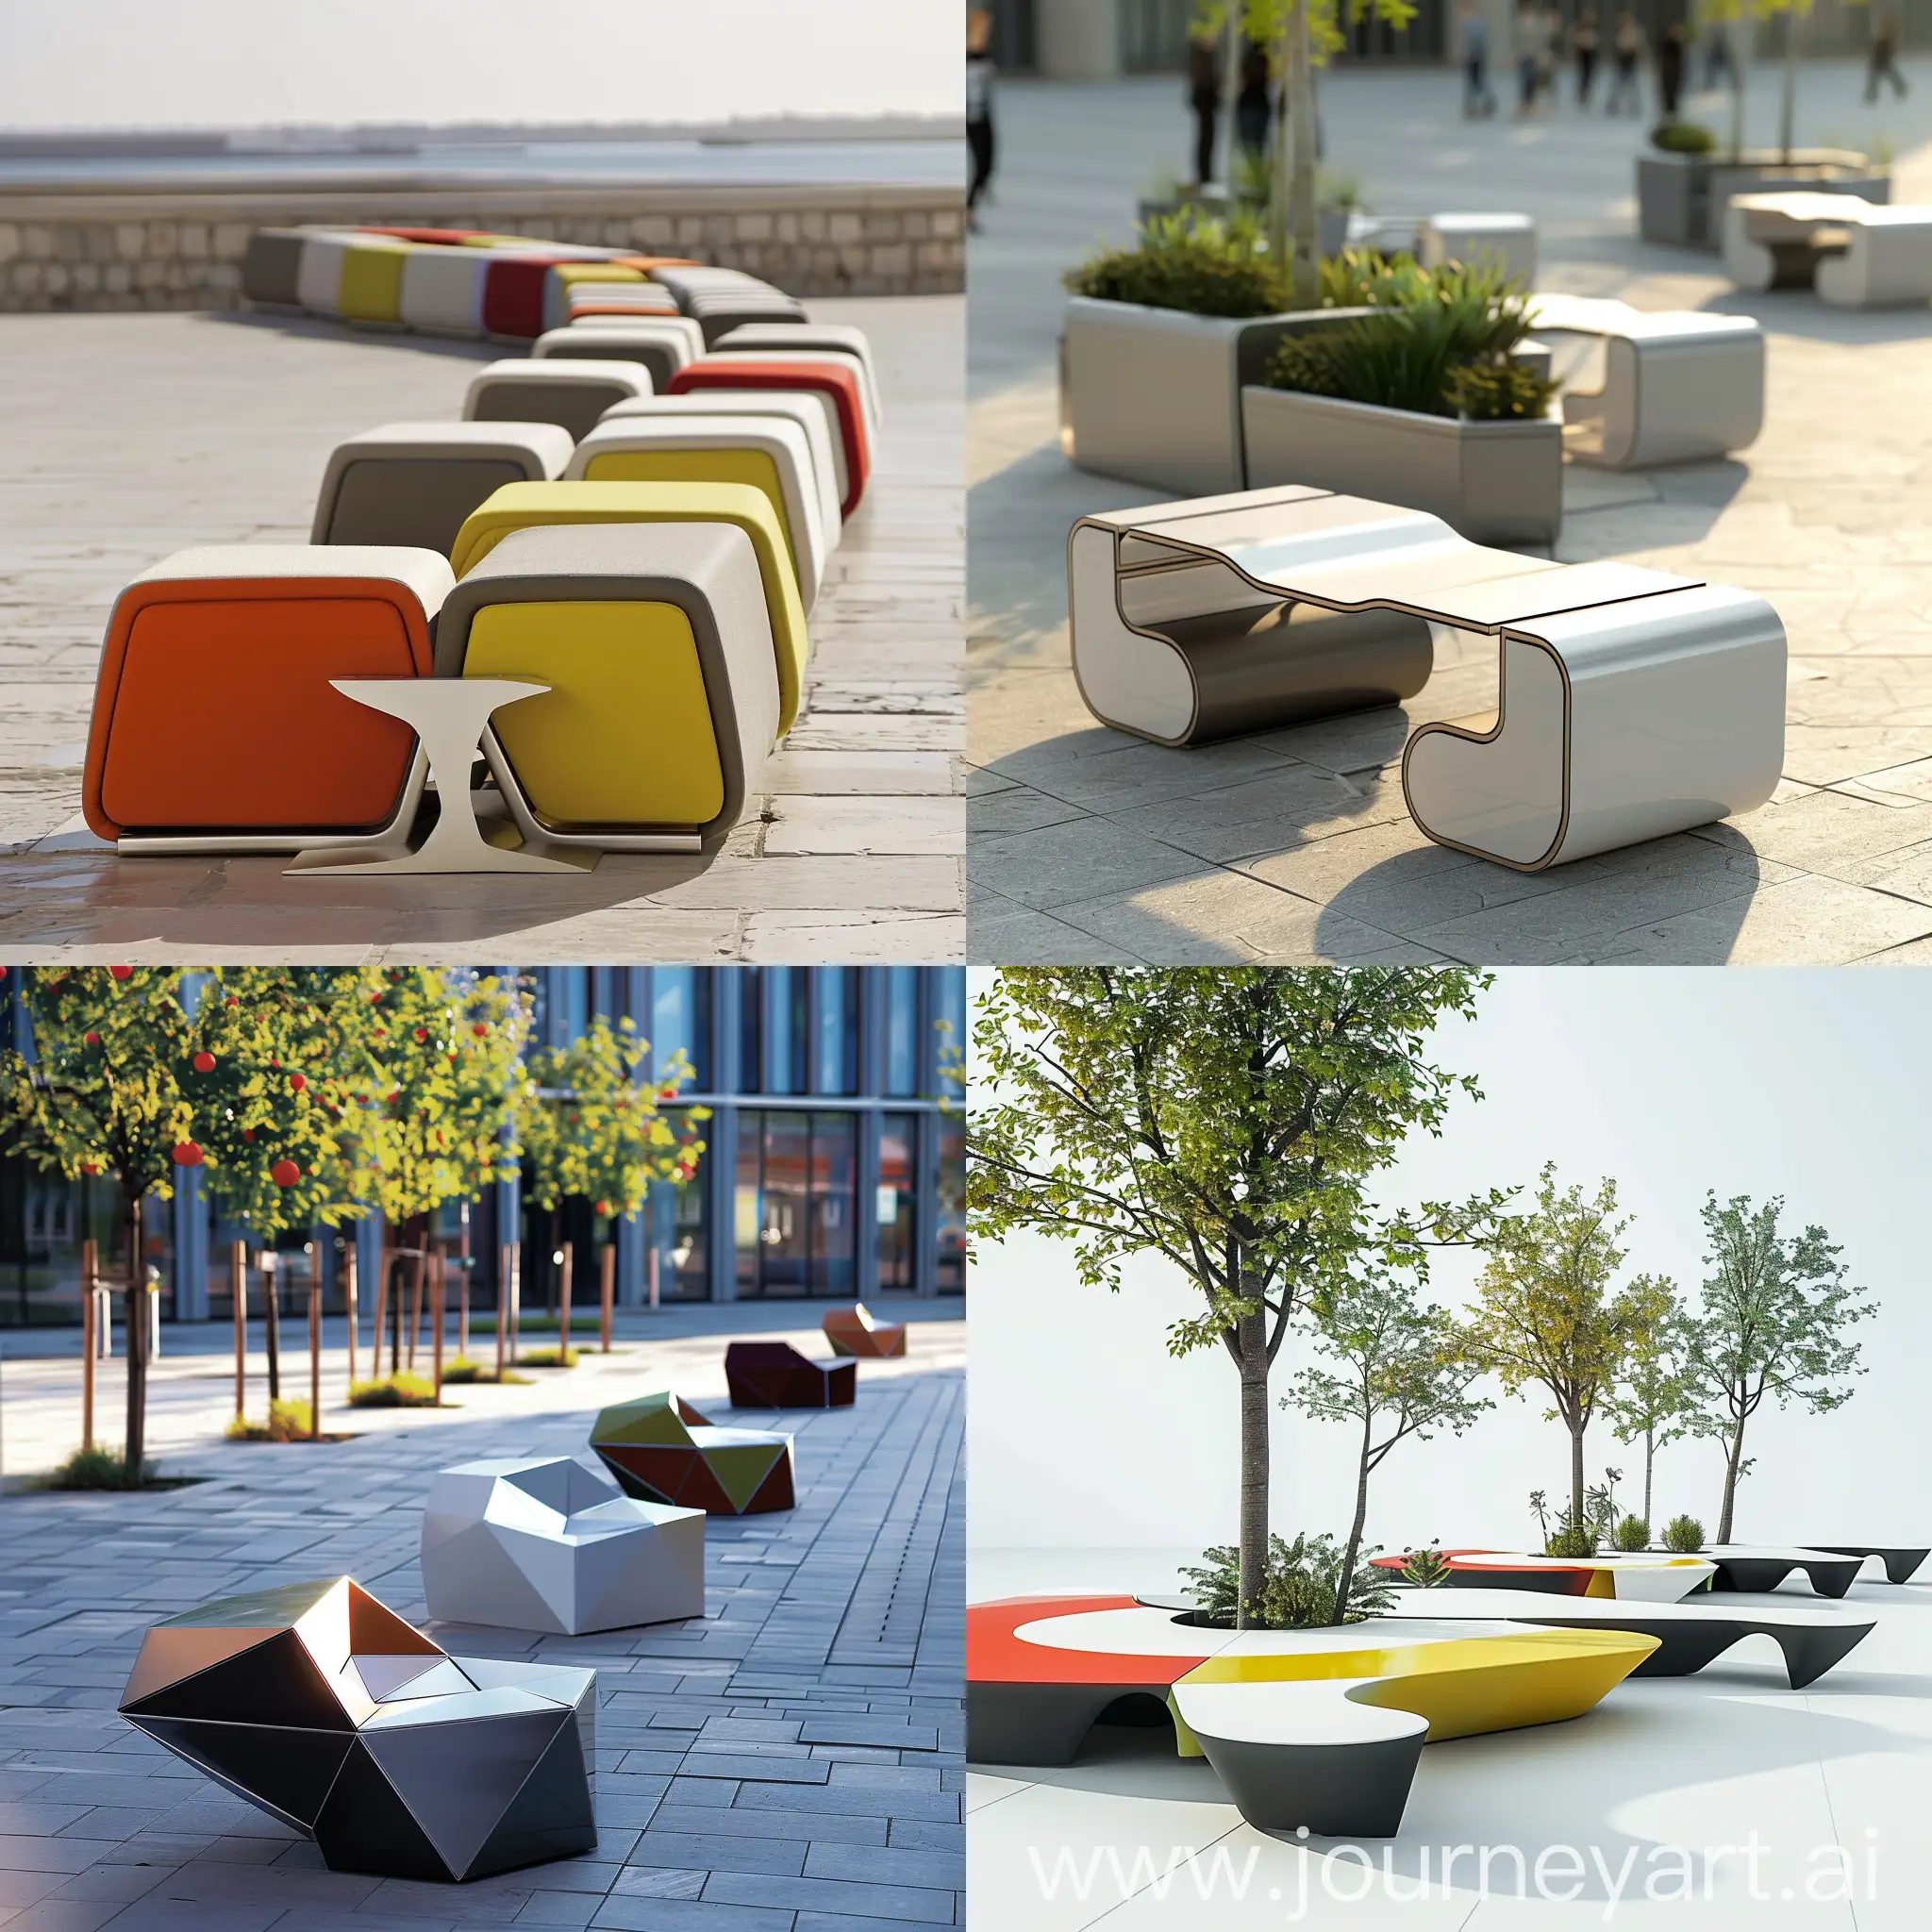 Modular-Seating-Design-for-Urban-Parks-and-Public-Spaces